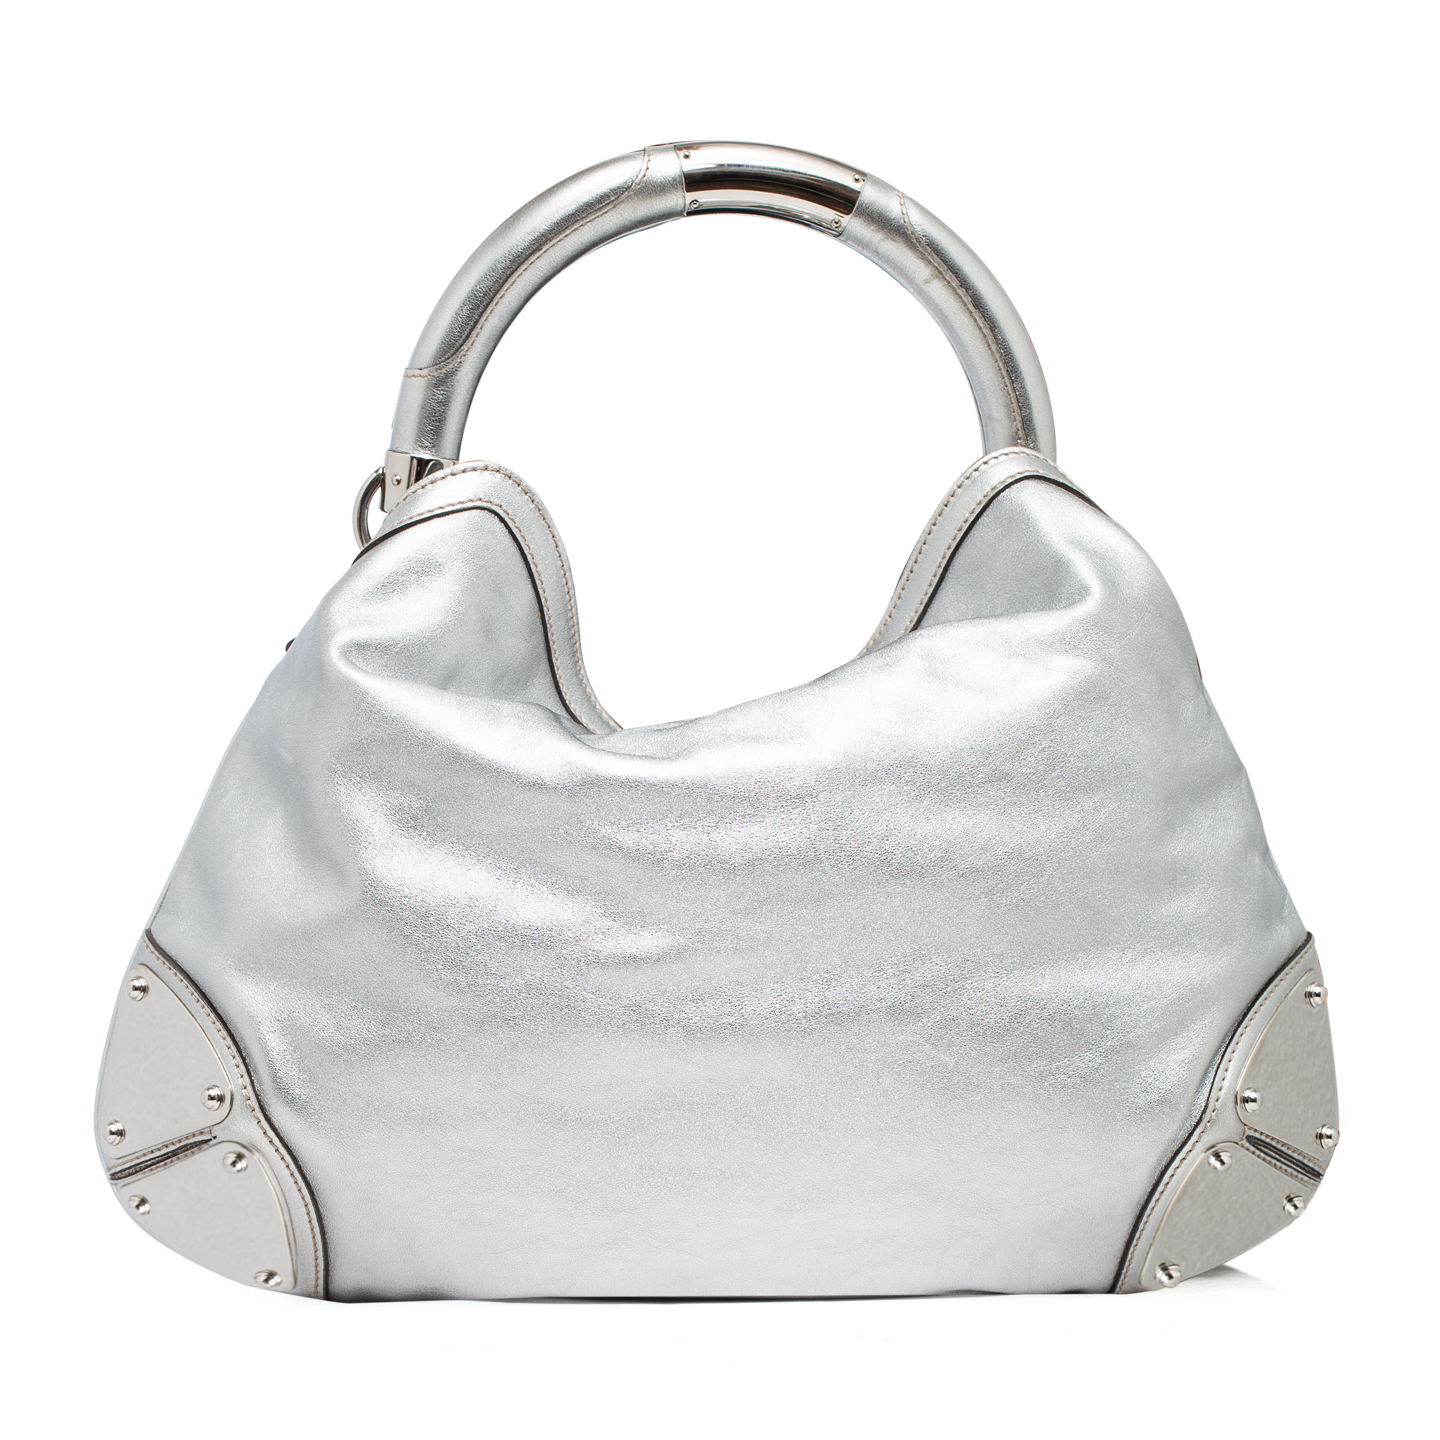 Gucci Metallic Silver Leather Indy Top Handle Bag - LabelCentric